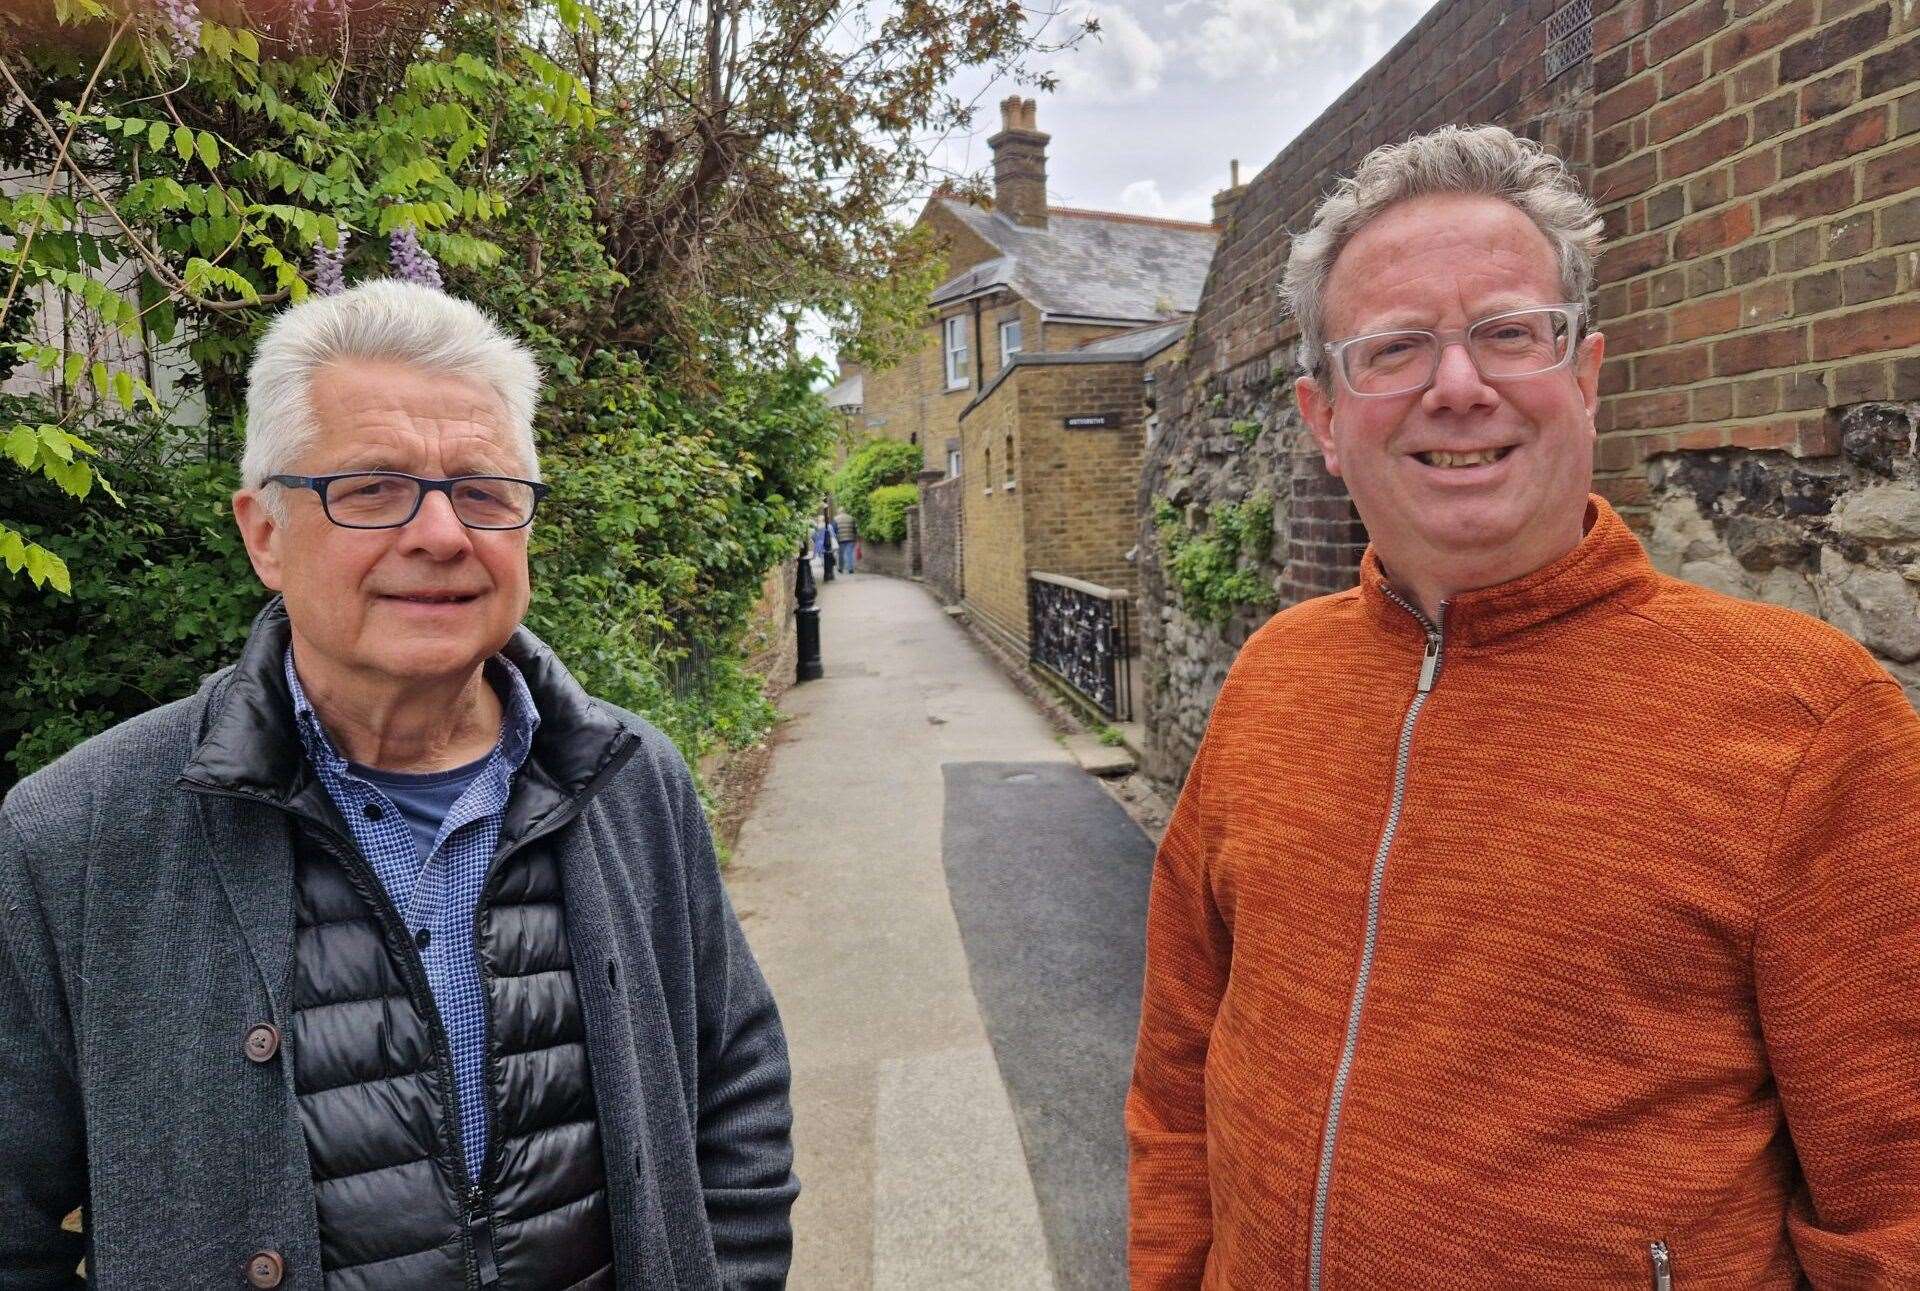 Cllr Julian Saunders and Cllr Eddie Thomas at Gatefield Lane, part of the Cross Town Path